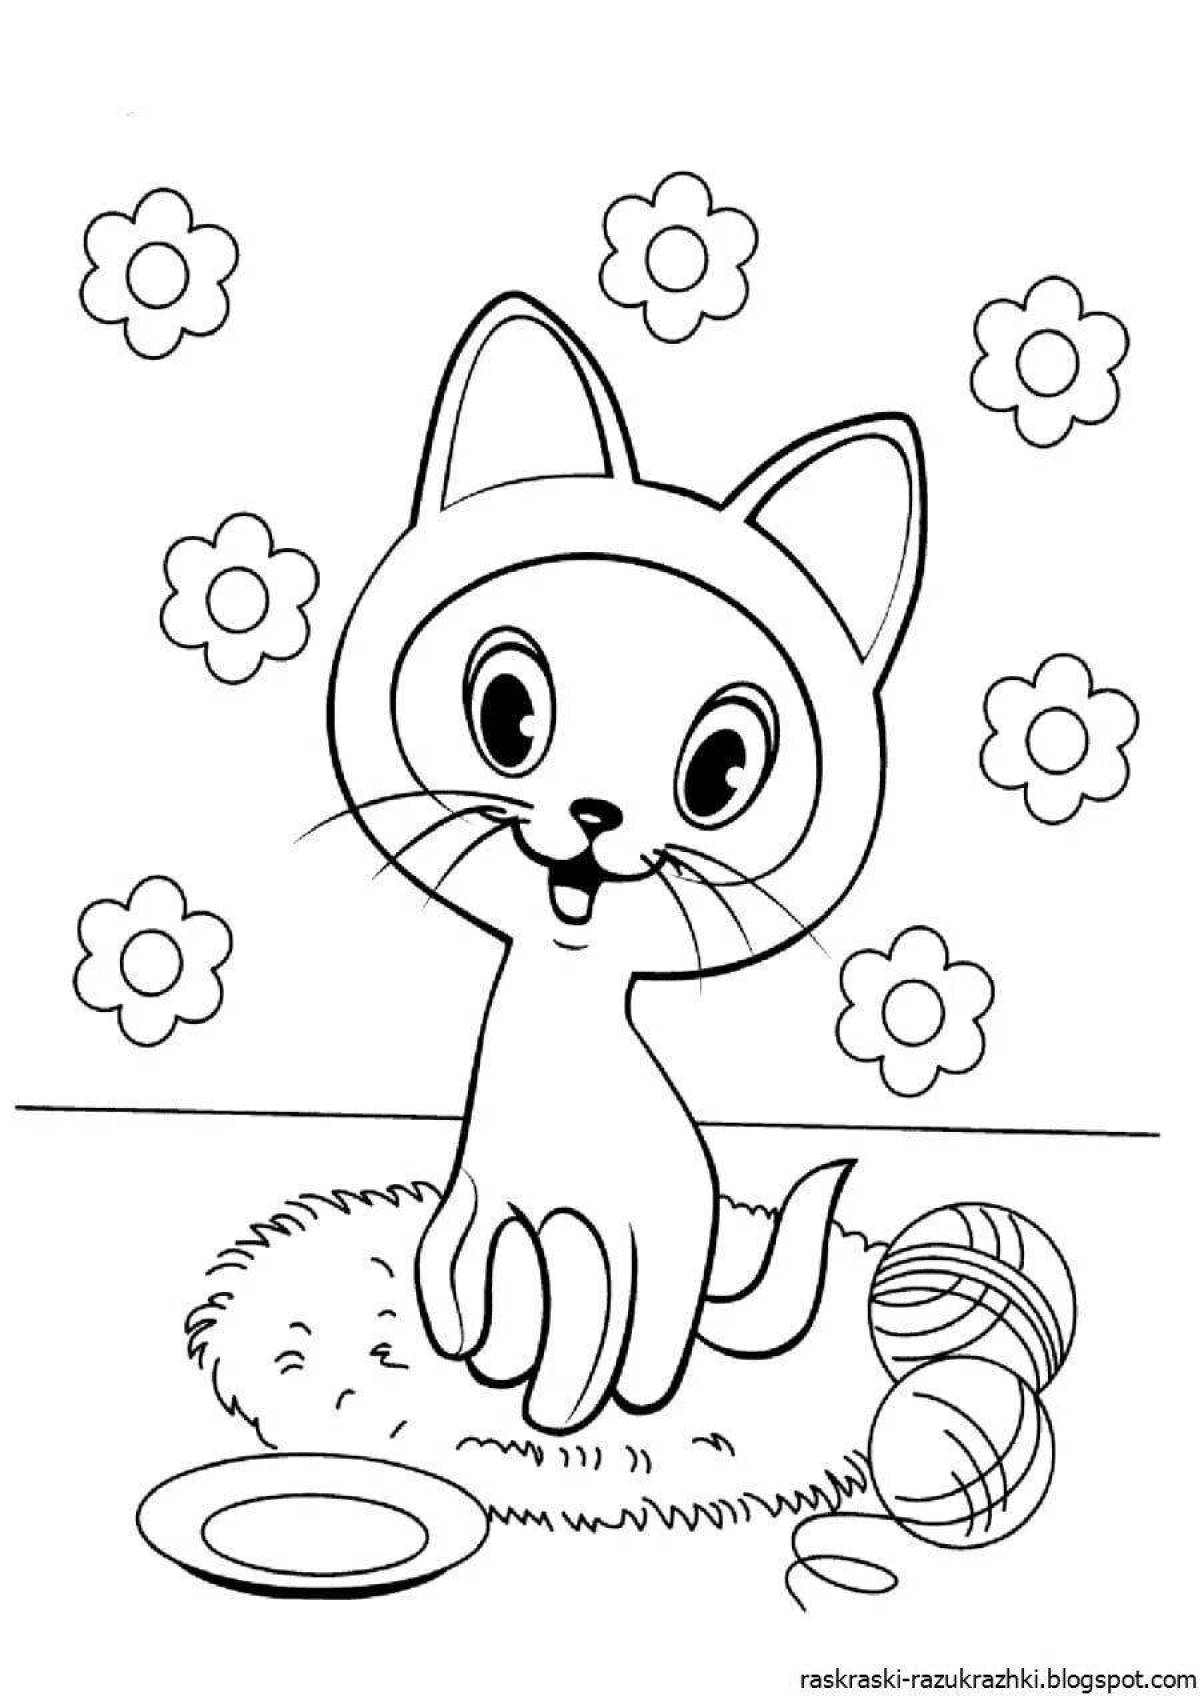 Glowing cat coloring book for kids